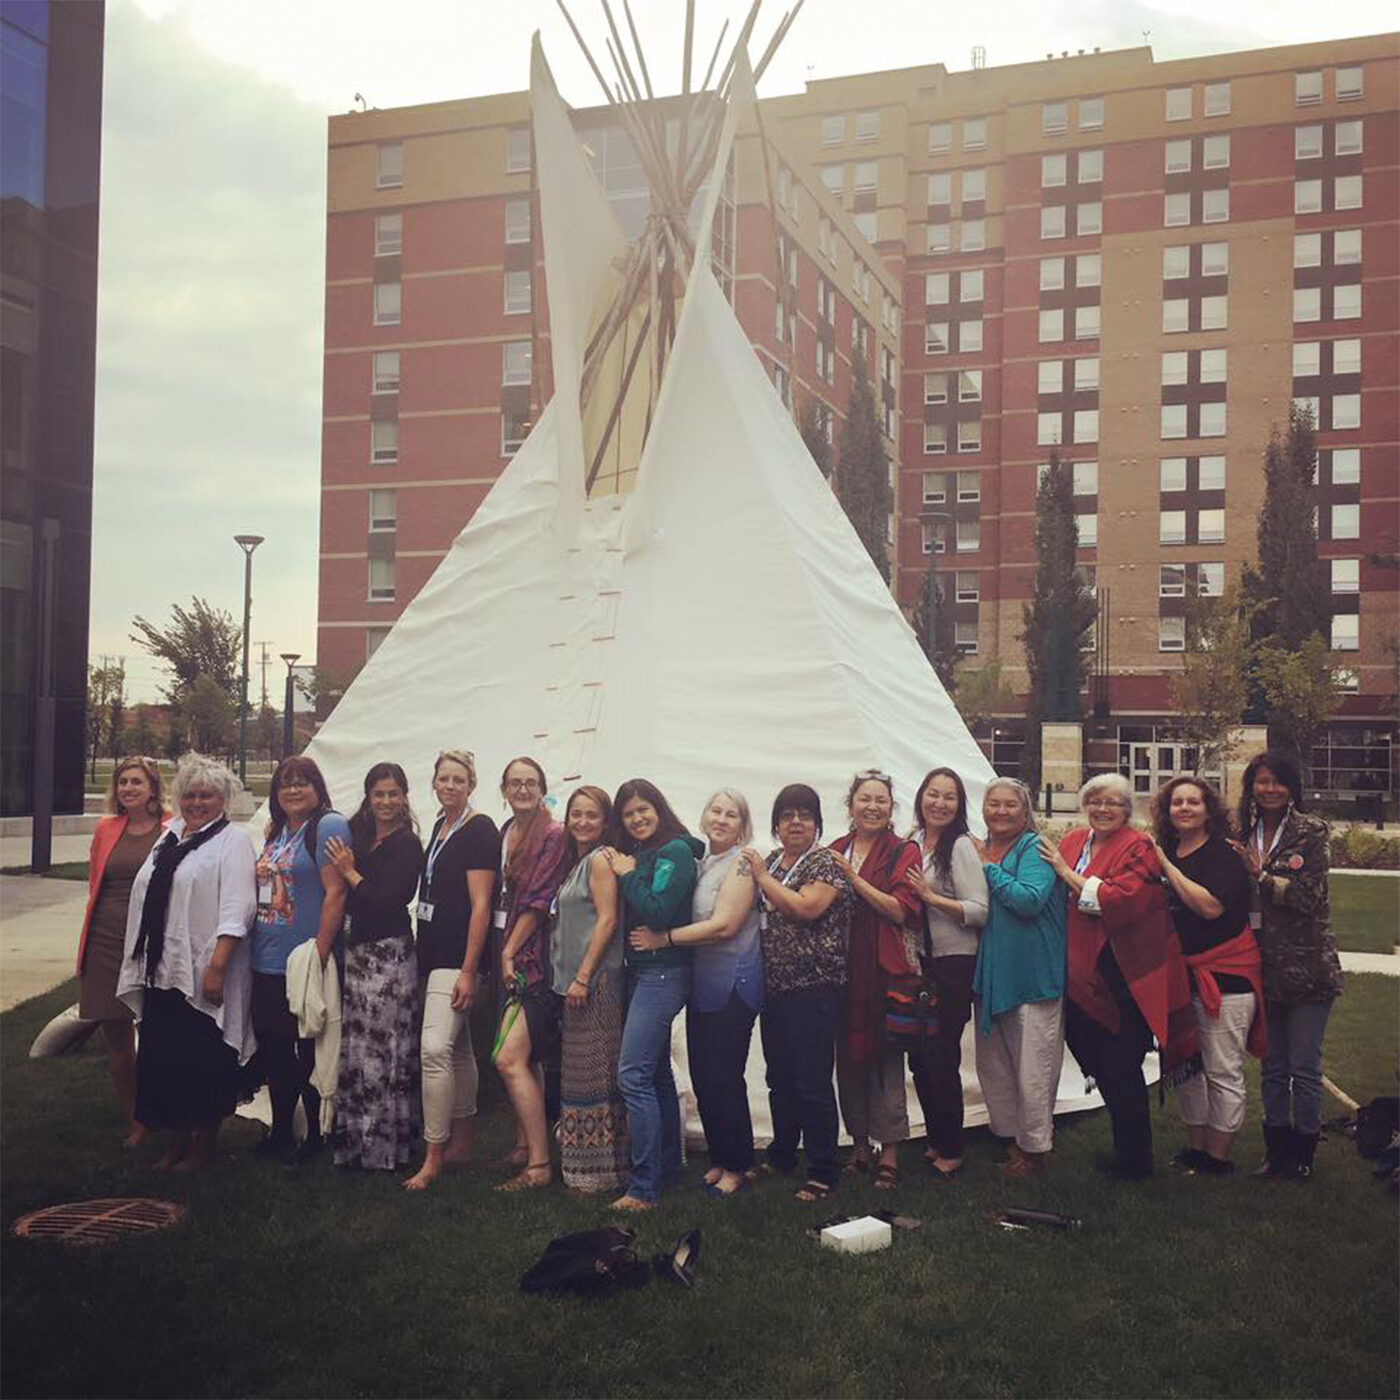 Sixteen women stand in a line in front of a teepee made of white fabric over a wooden frame. They are turned to the left and smiling towards the camera. Many have their hands resting on the shoulders of the woman in front of them, and in front of them some shoes and purses are scattered on the grass. Behind them is a multi-story red brick building and a bright grey sky.